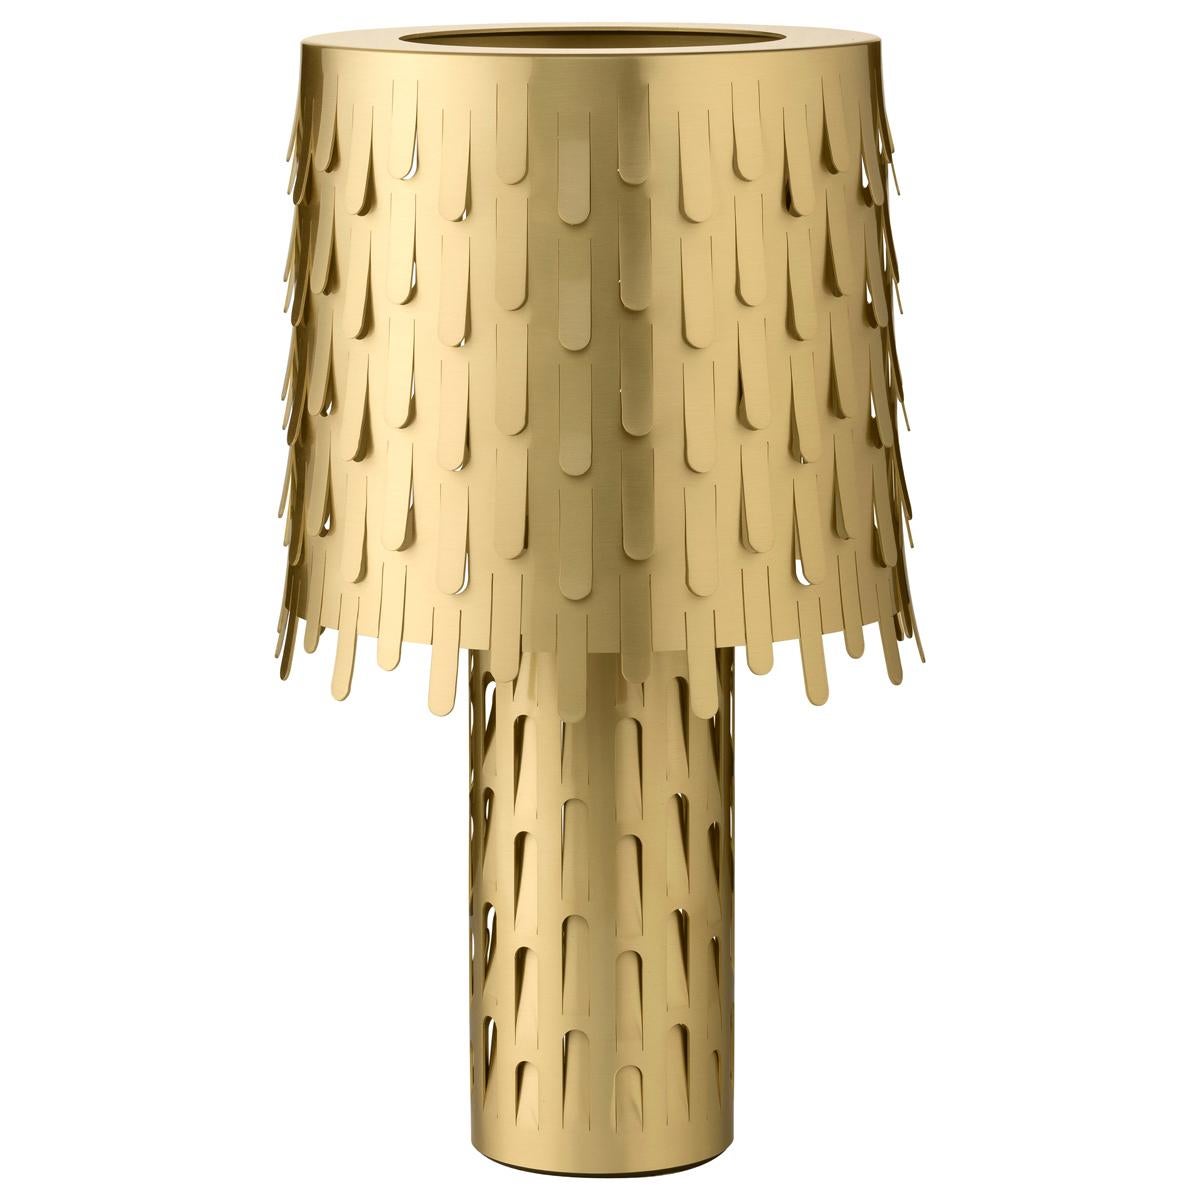 Jackfruit Table Lamp in Satin Brass by Campana Brothers